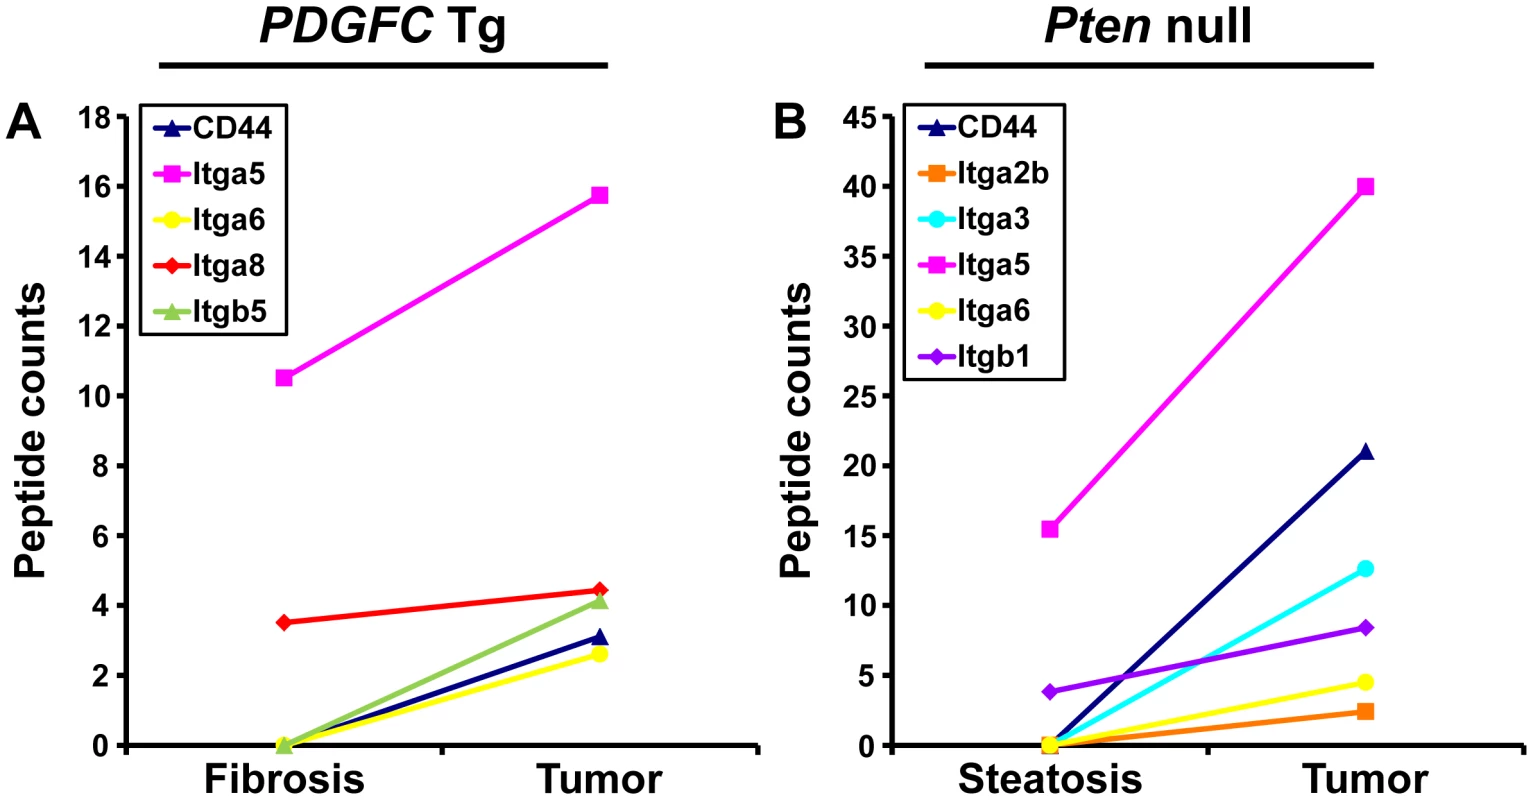 CD44 and integrin proteins up-regulated in <i>PDGFC</i> Tg and <i>Pten</i> null tumors.